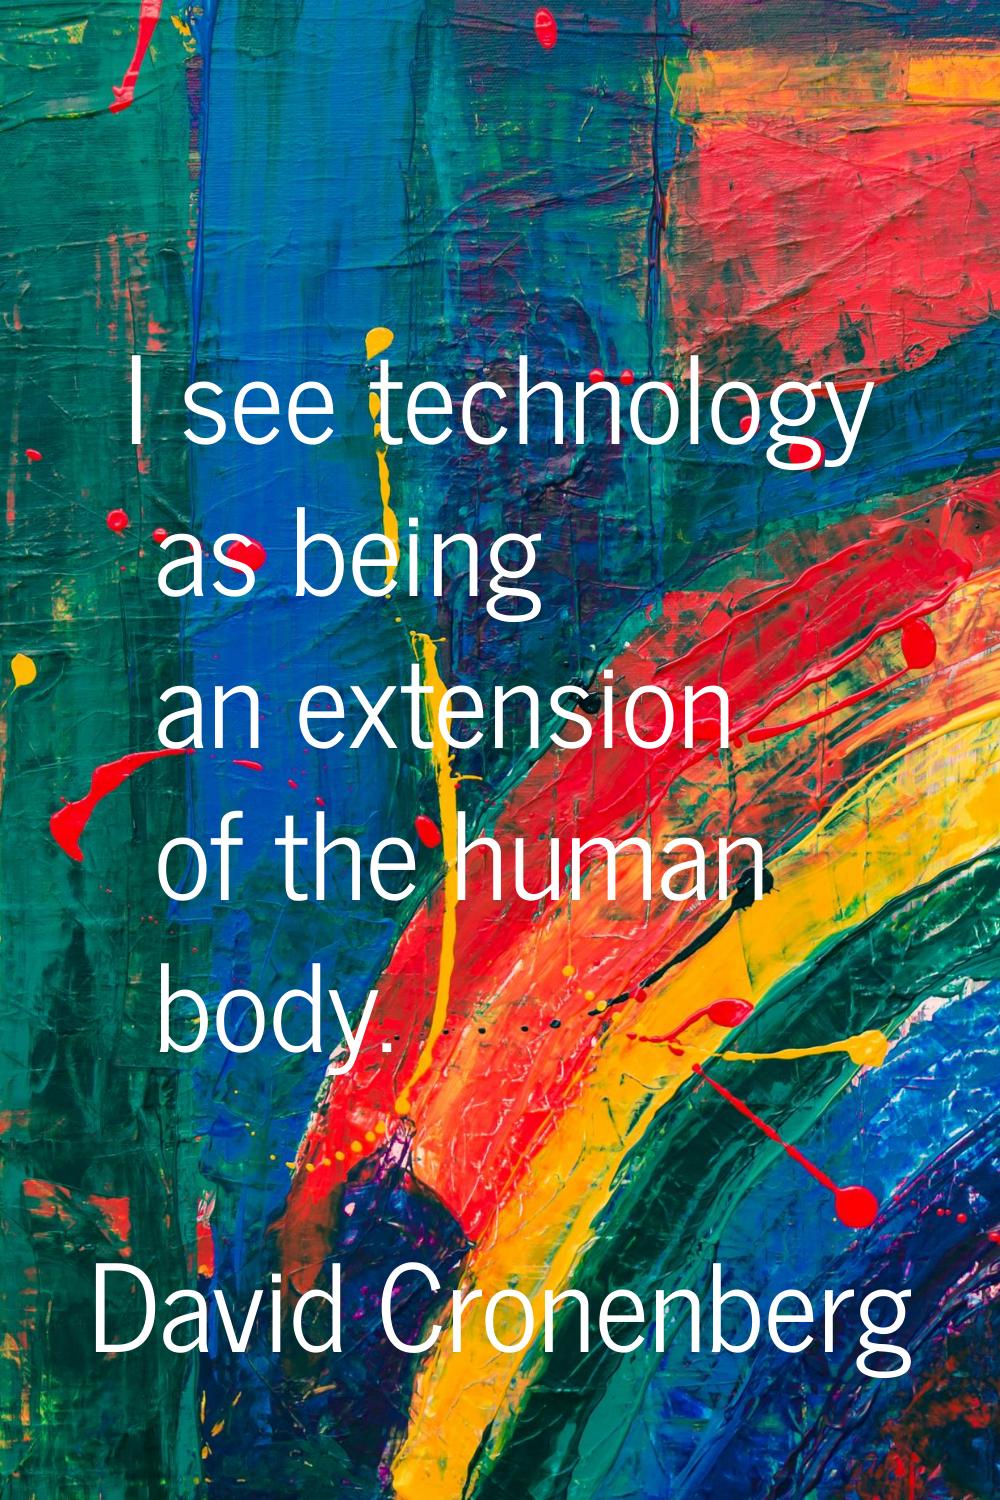 I see technology as being an extension of the human body.